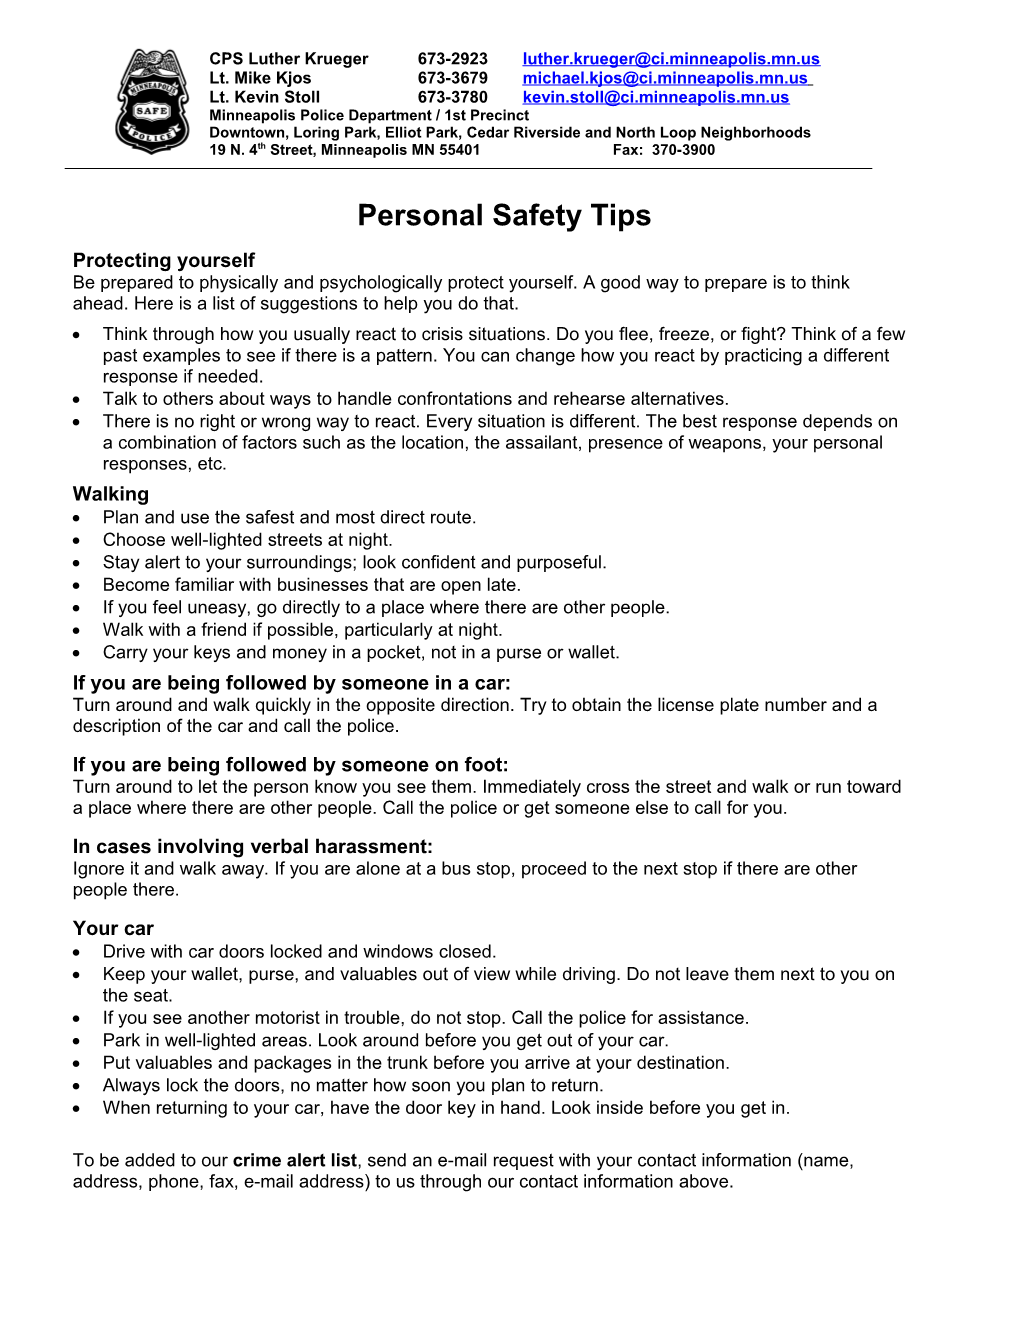 Personal Safety Tips